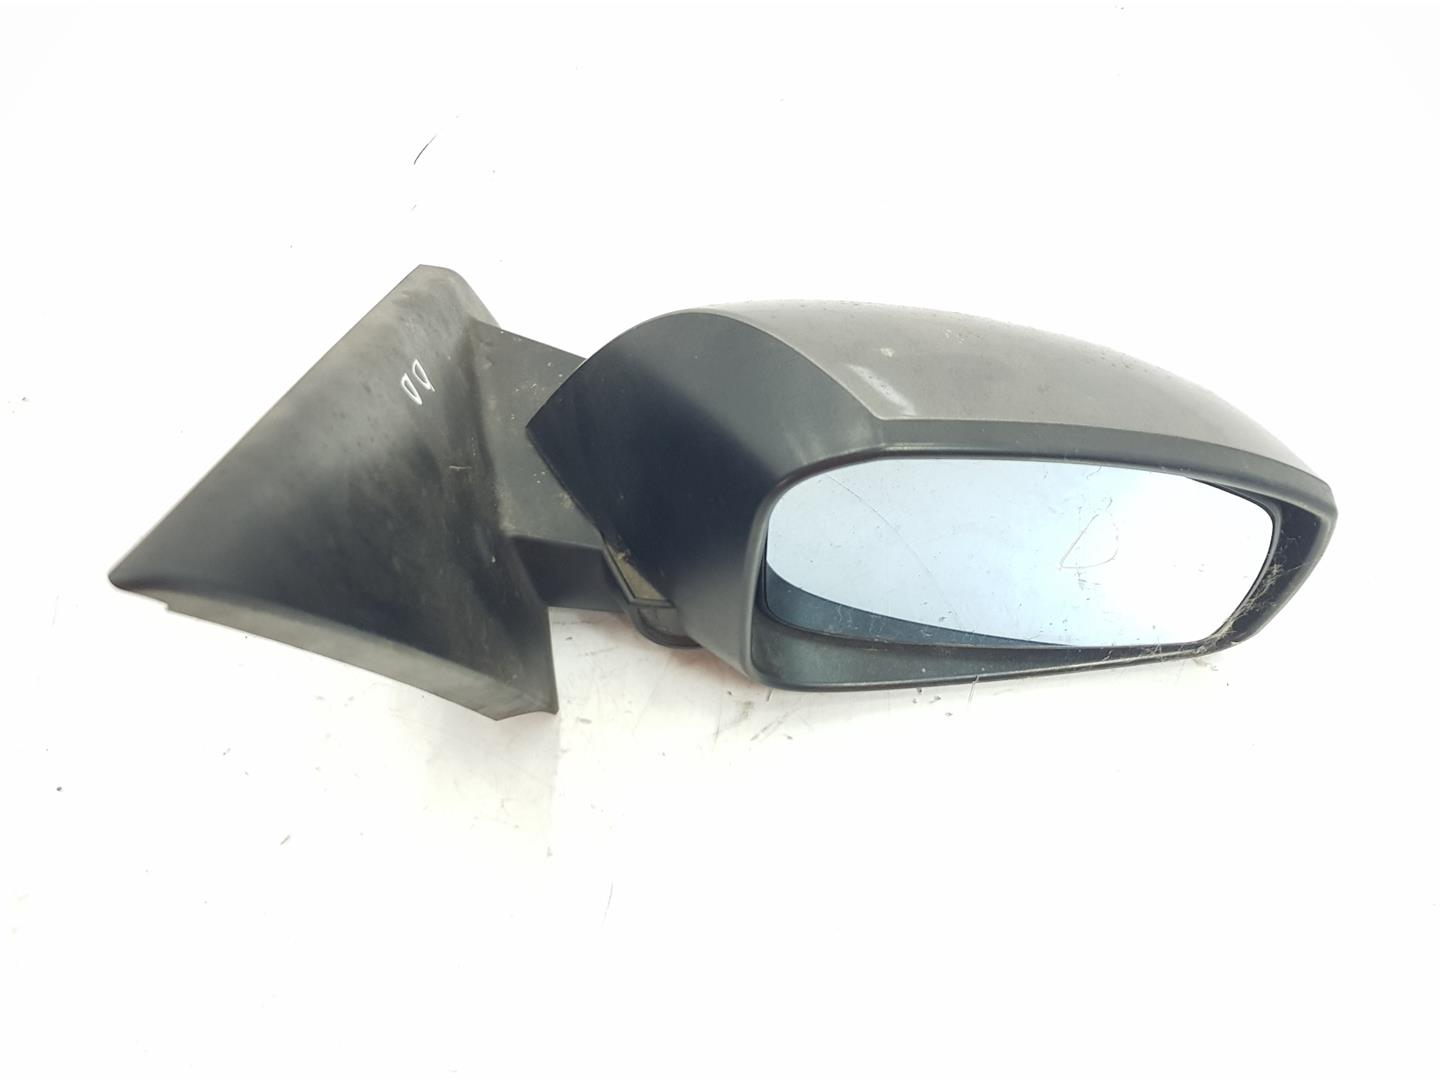 RENAULT Laguna 3 generation (2007-2015) Right Side Wing Mirror 963010153R, 963010153R, COLORMARRONTEKND 24132777